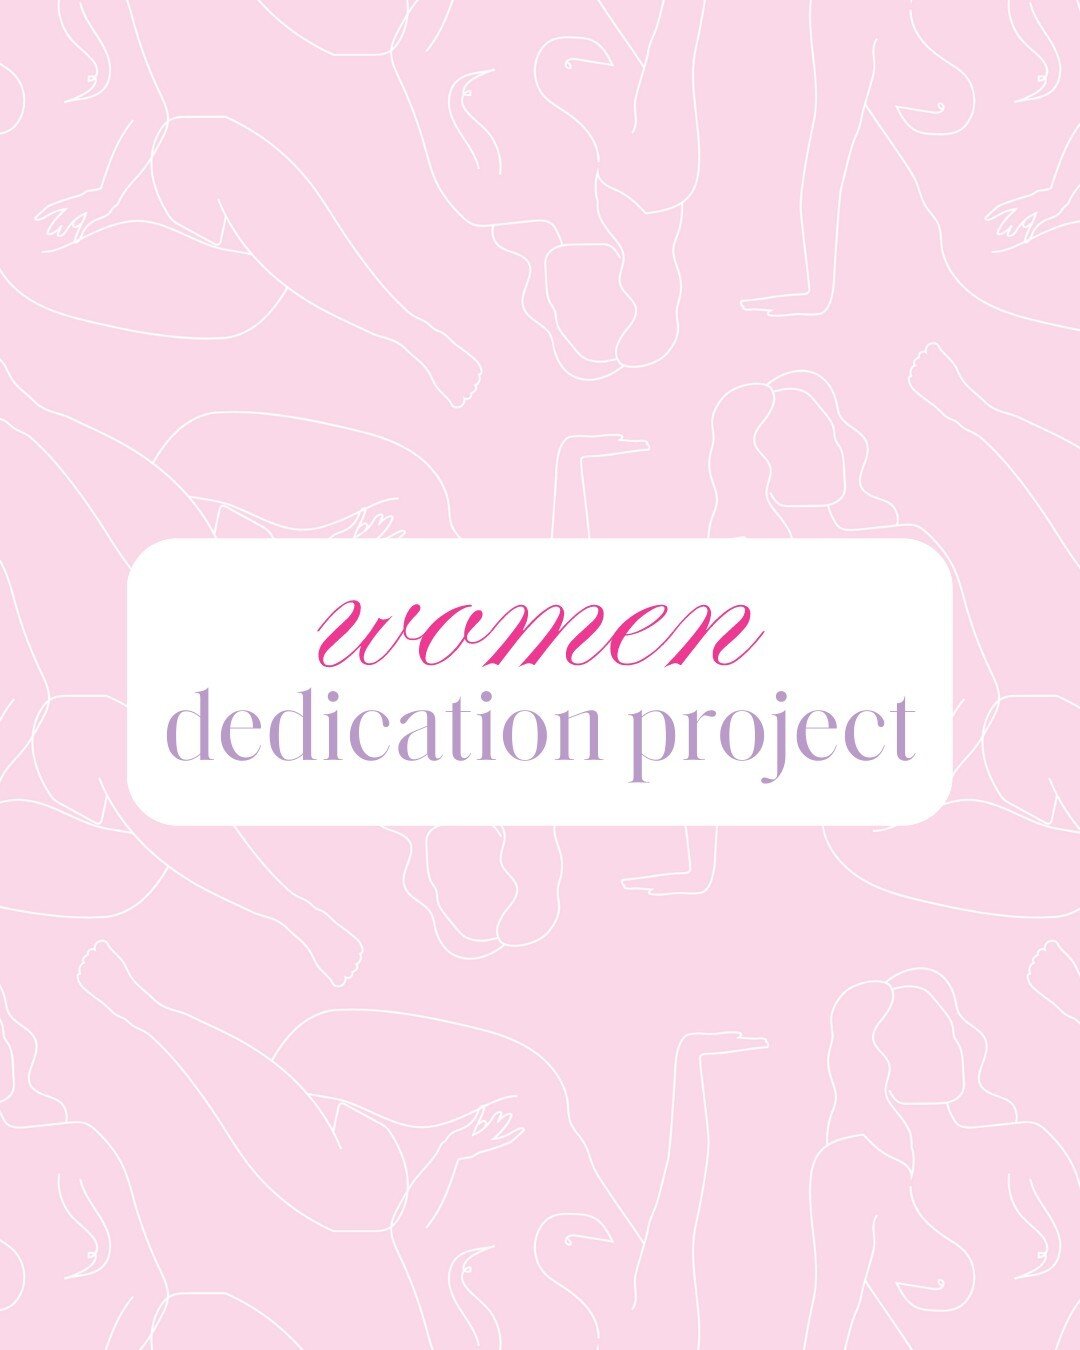 On International Women's Day, our team expressed Femme's goal to emphasize and highlight the important historic and current-day women who have made significant contributions to healthcare, women's rights and socio-economic activism. ⁠
⁠
Each Thursday